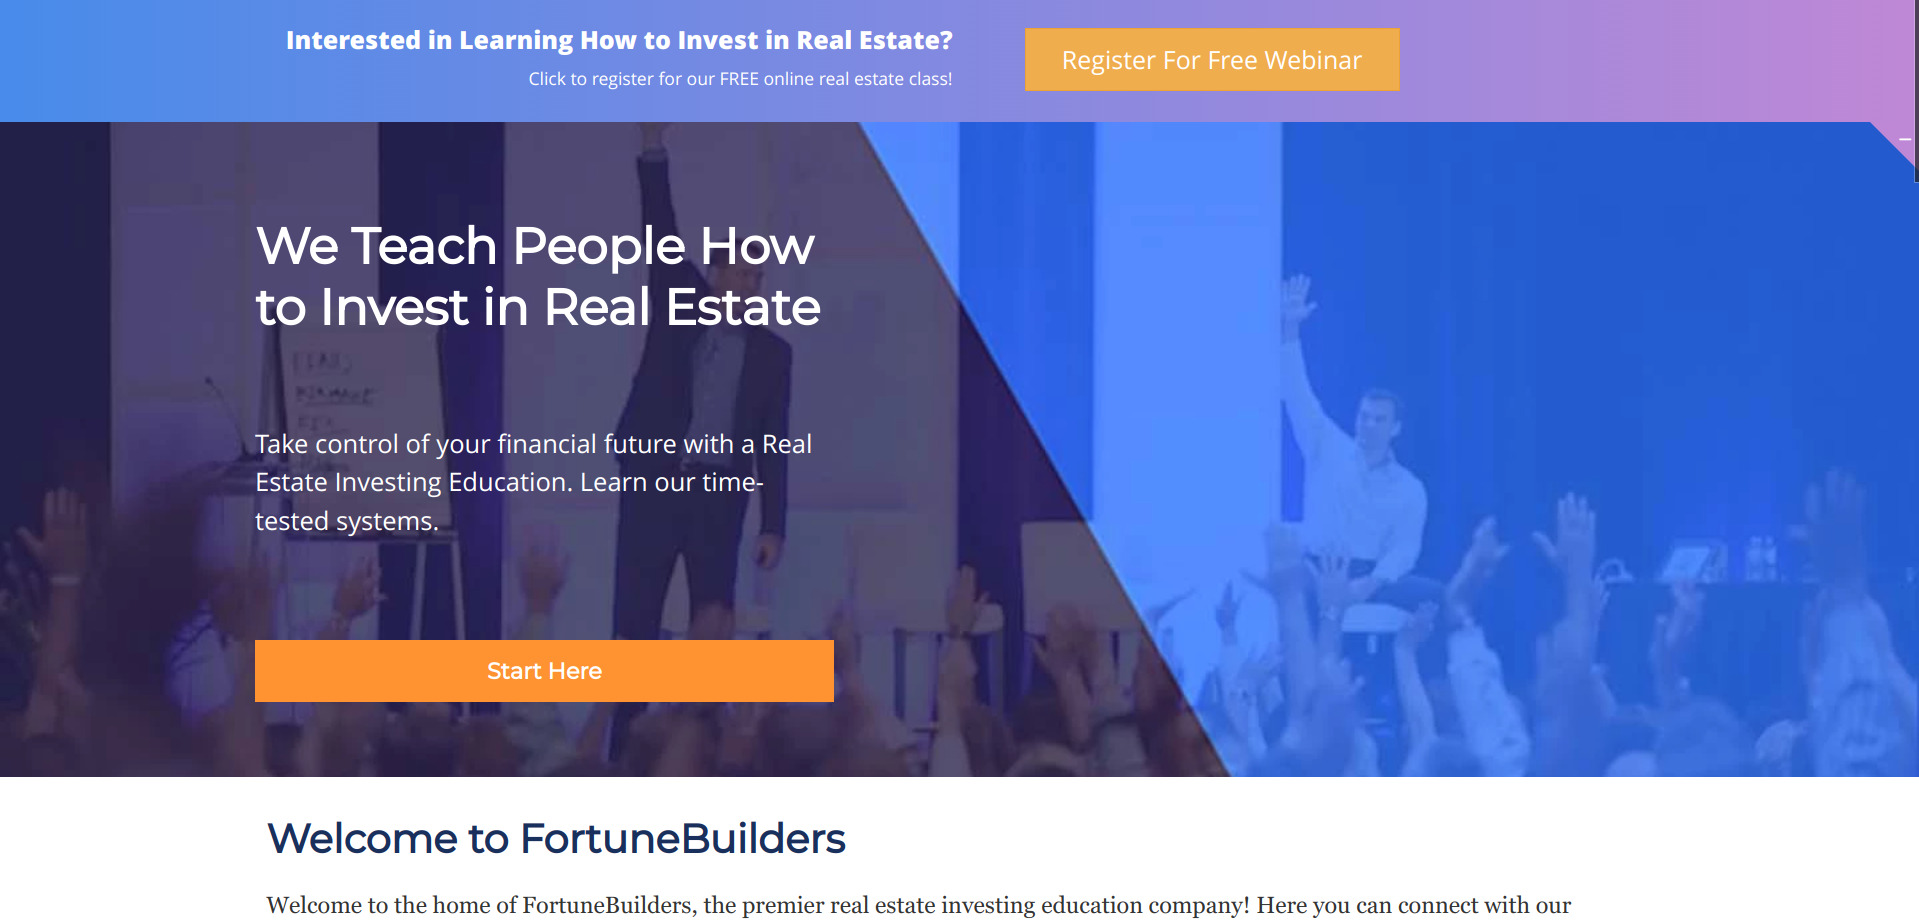 Is Fortune Builders a Scam or Legit